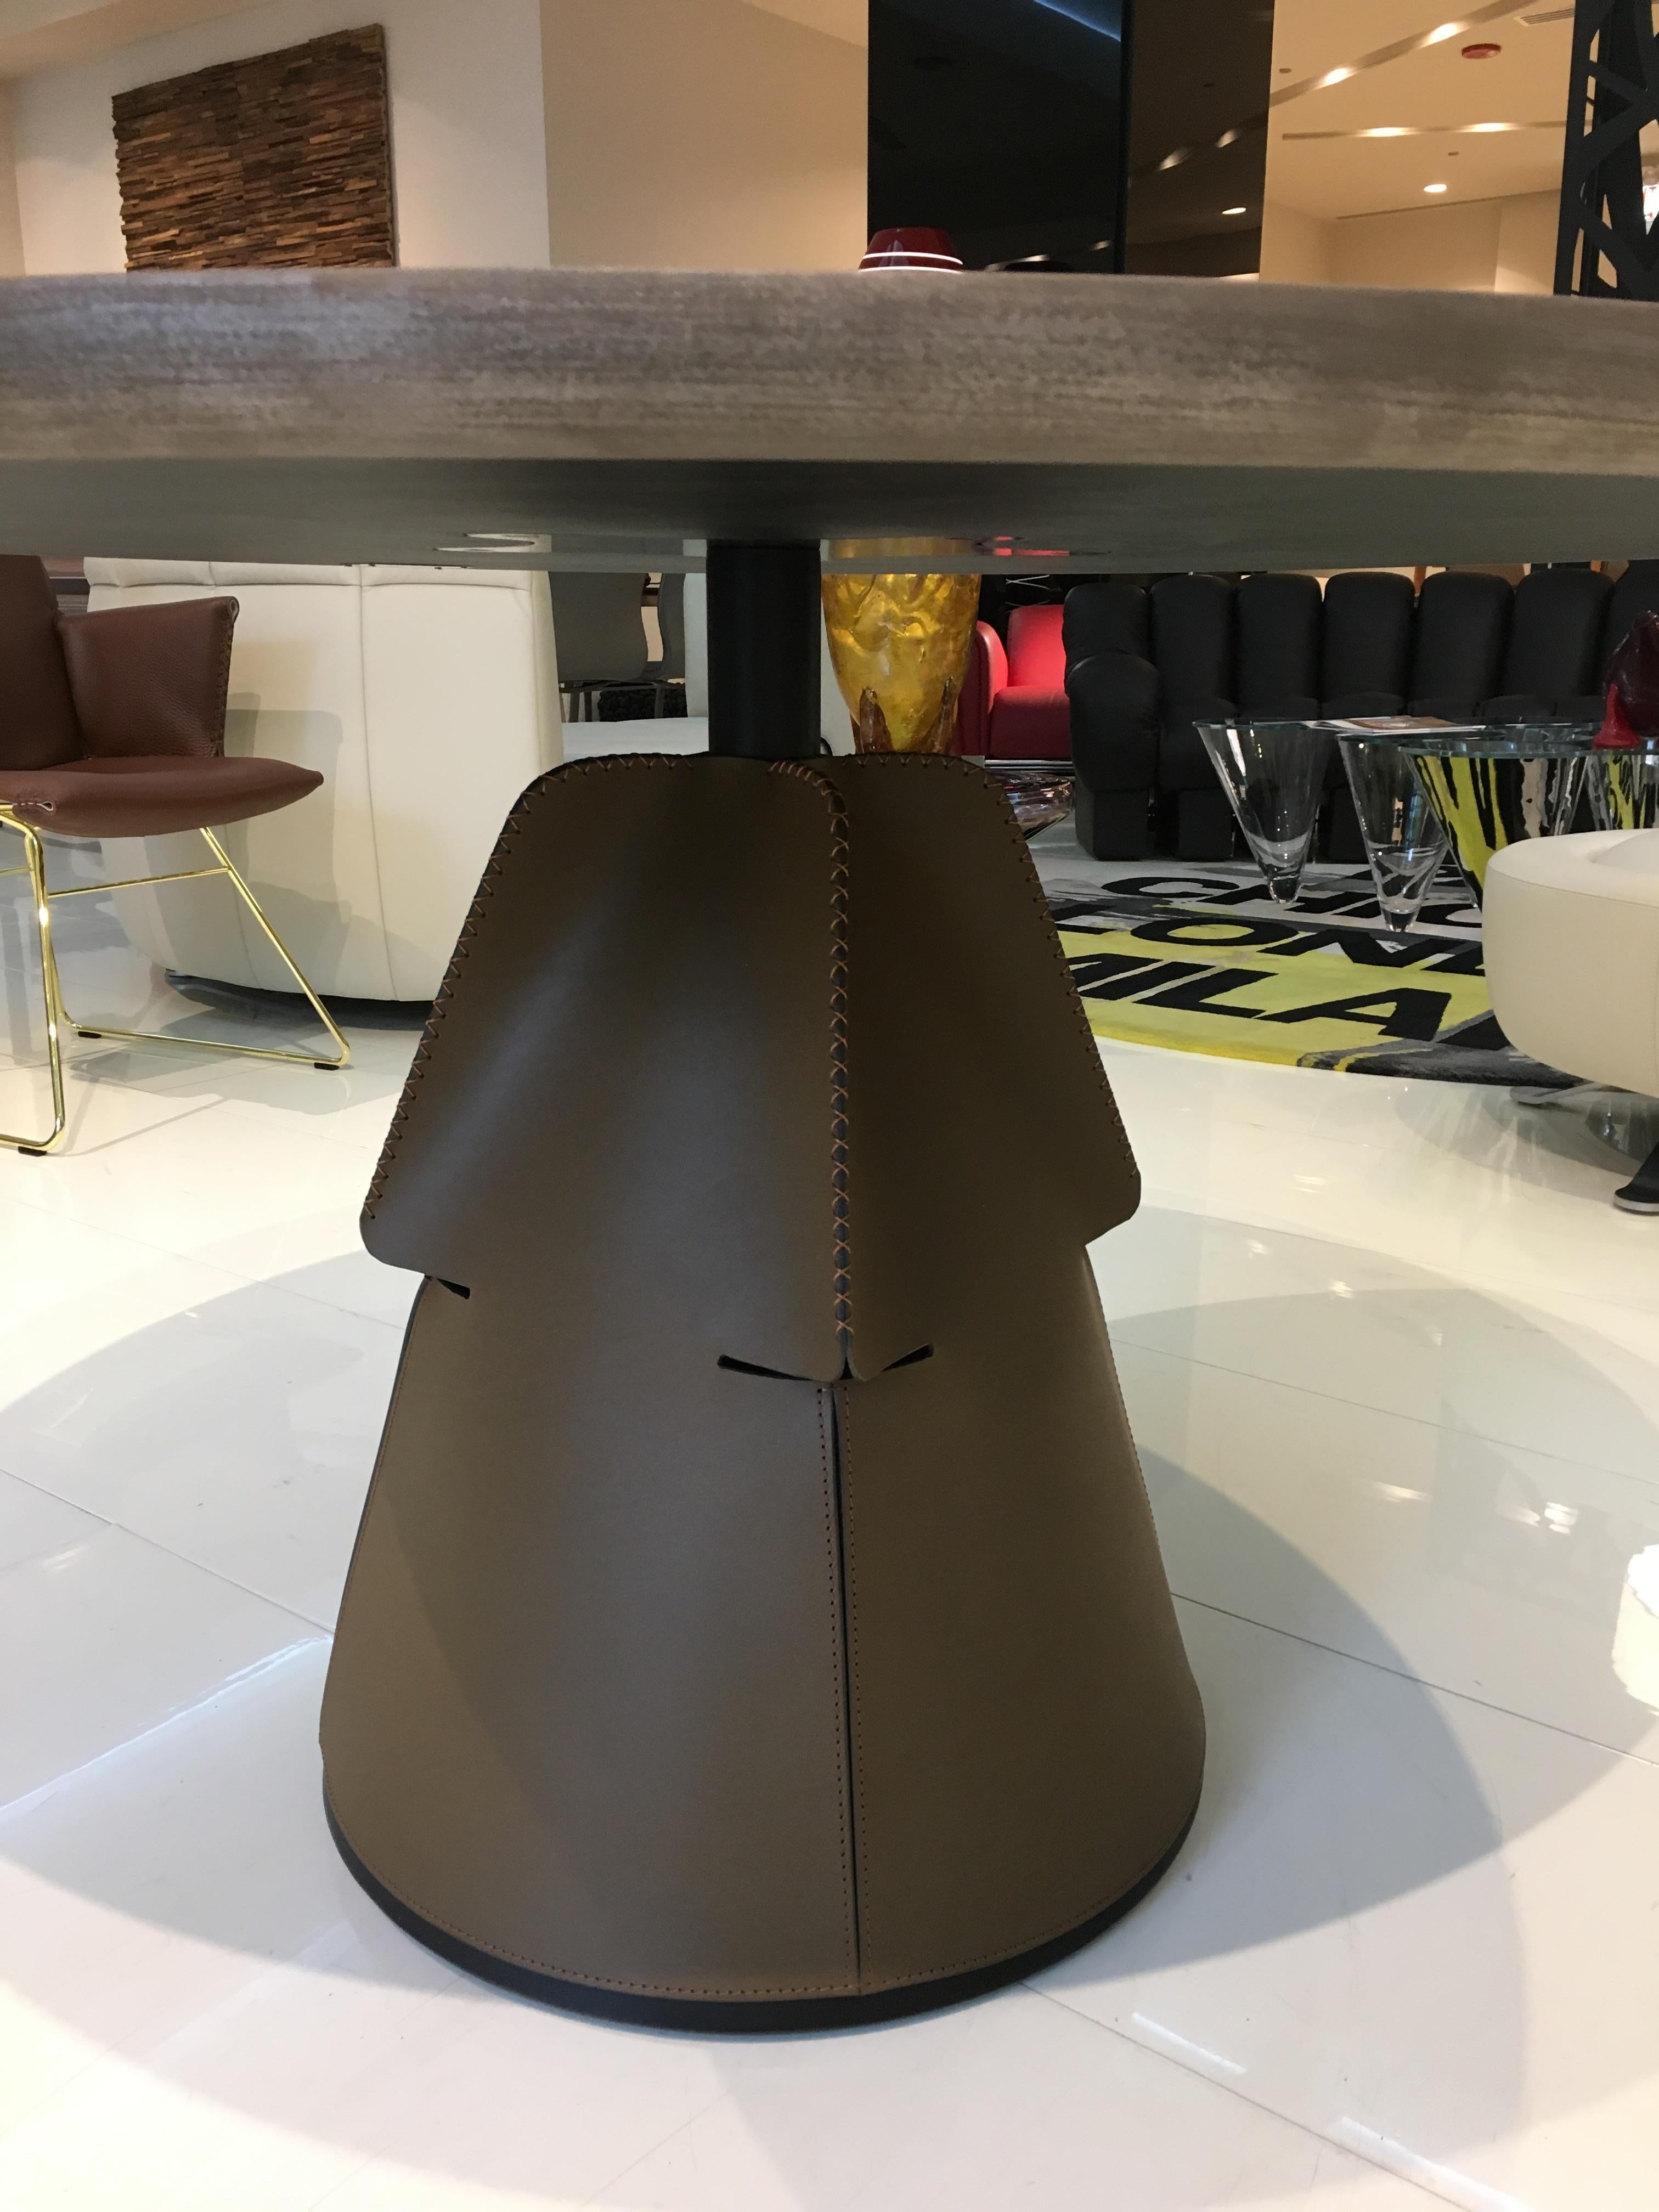 As leather experts, it is our great passion to experiment with leather as a material. With DS-615, we succeeded in achieving a major accolade as we were able to make the idea of bringing our leather to the table a reality.
 
The DS-615 table